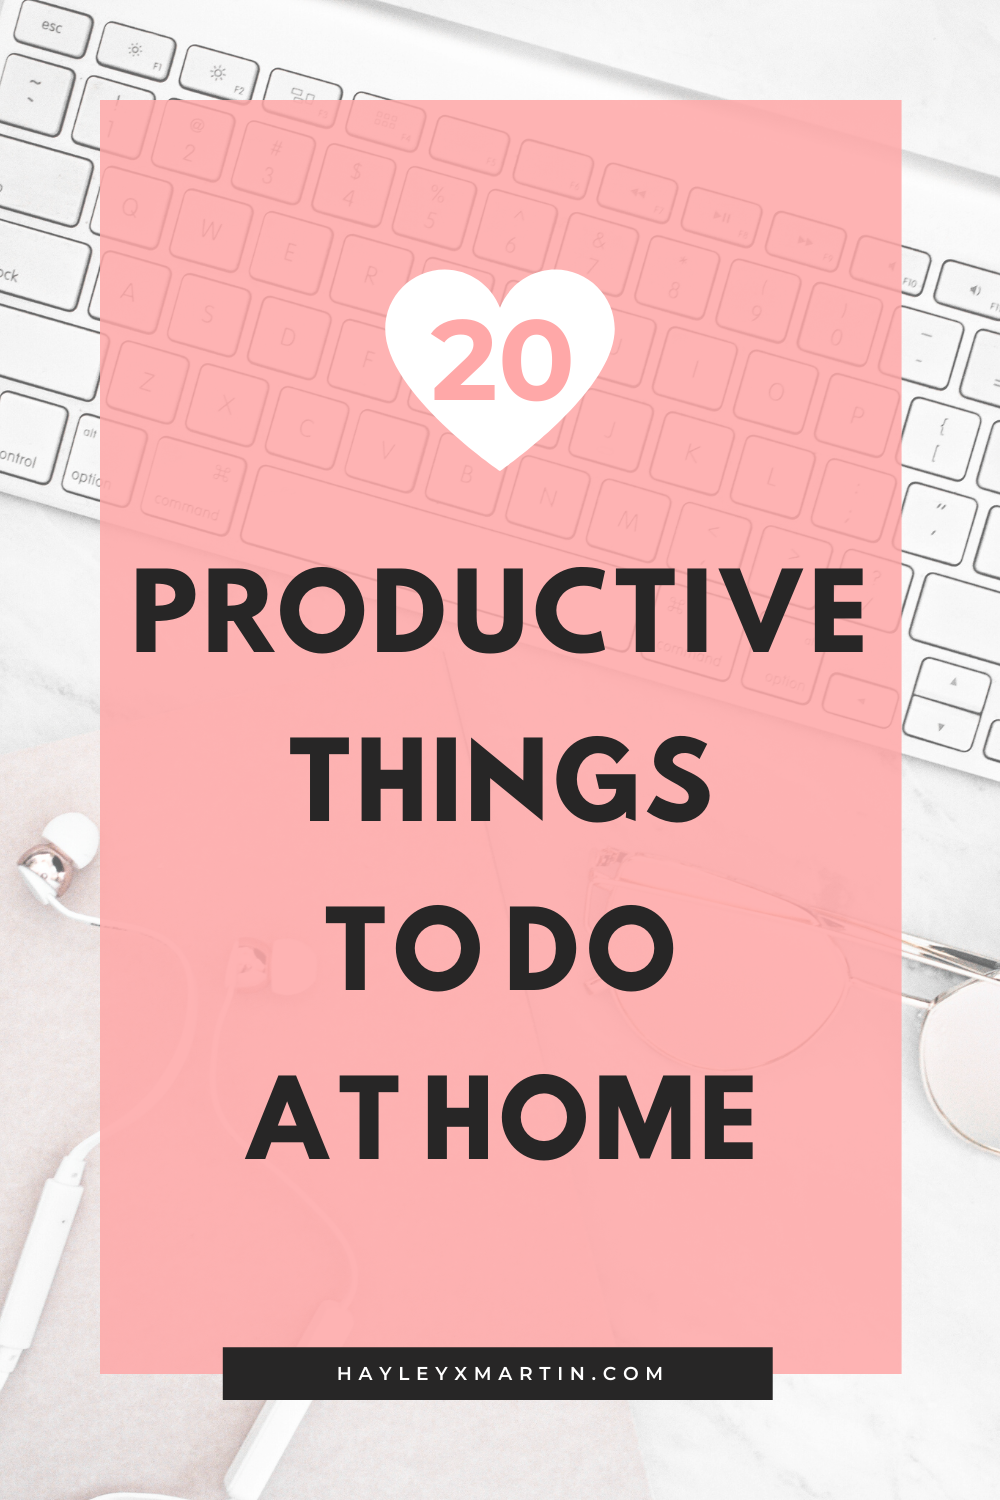 20 productive things to do at home